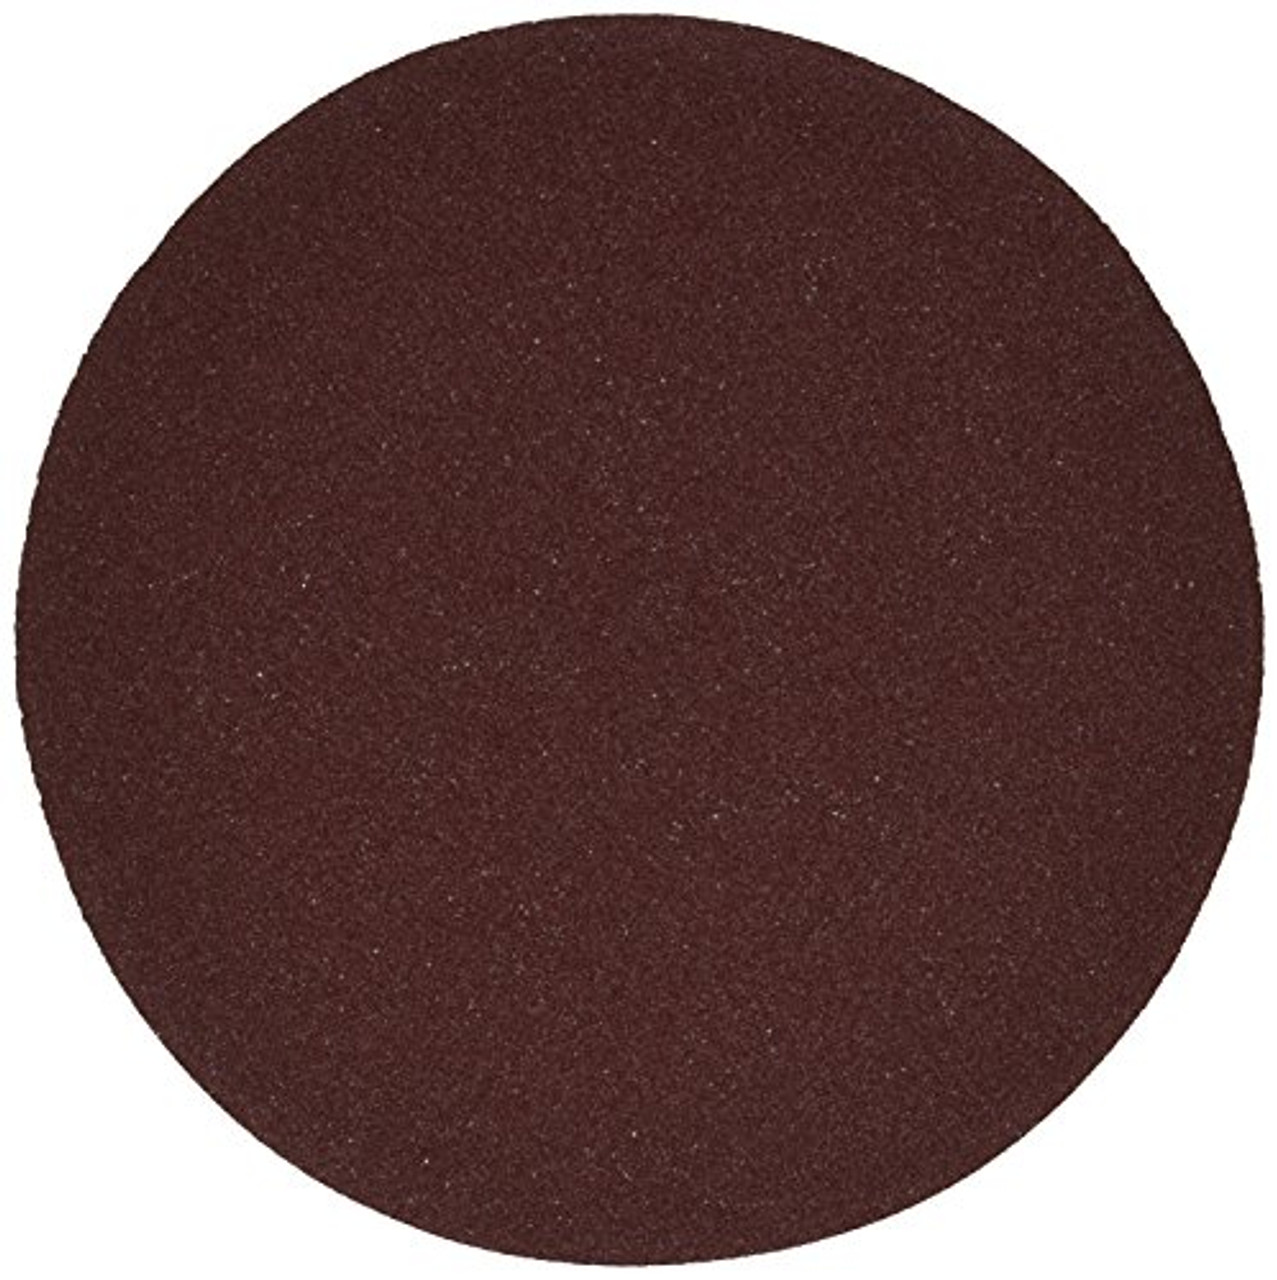 Full Circle International Inc. (SD80-5) 8-3/4 Level360 Sanding Disc 80 Grit for use with Radius360